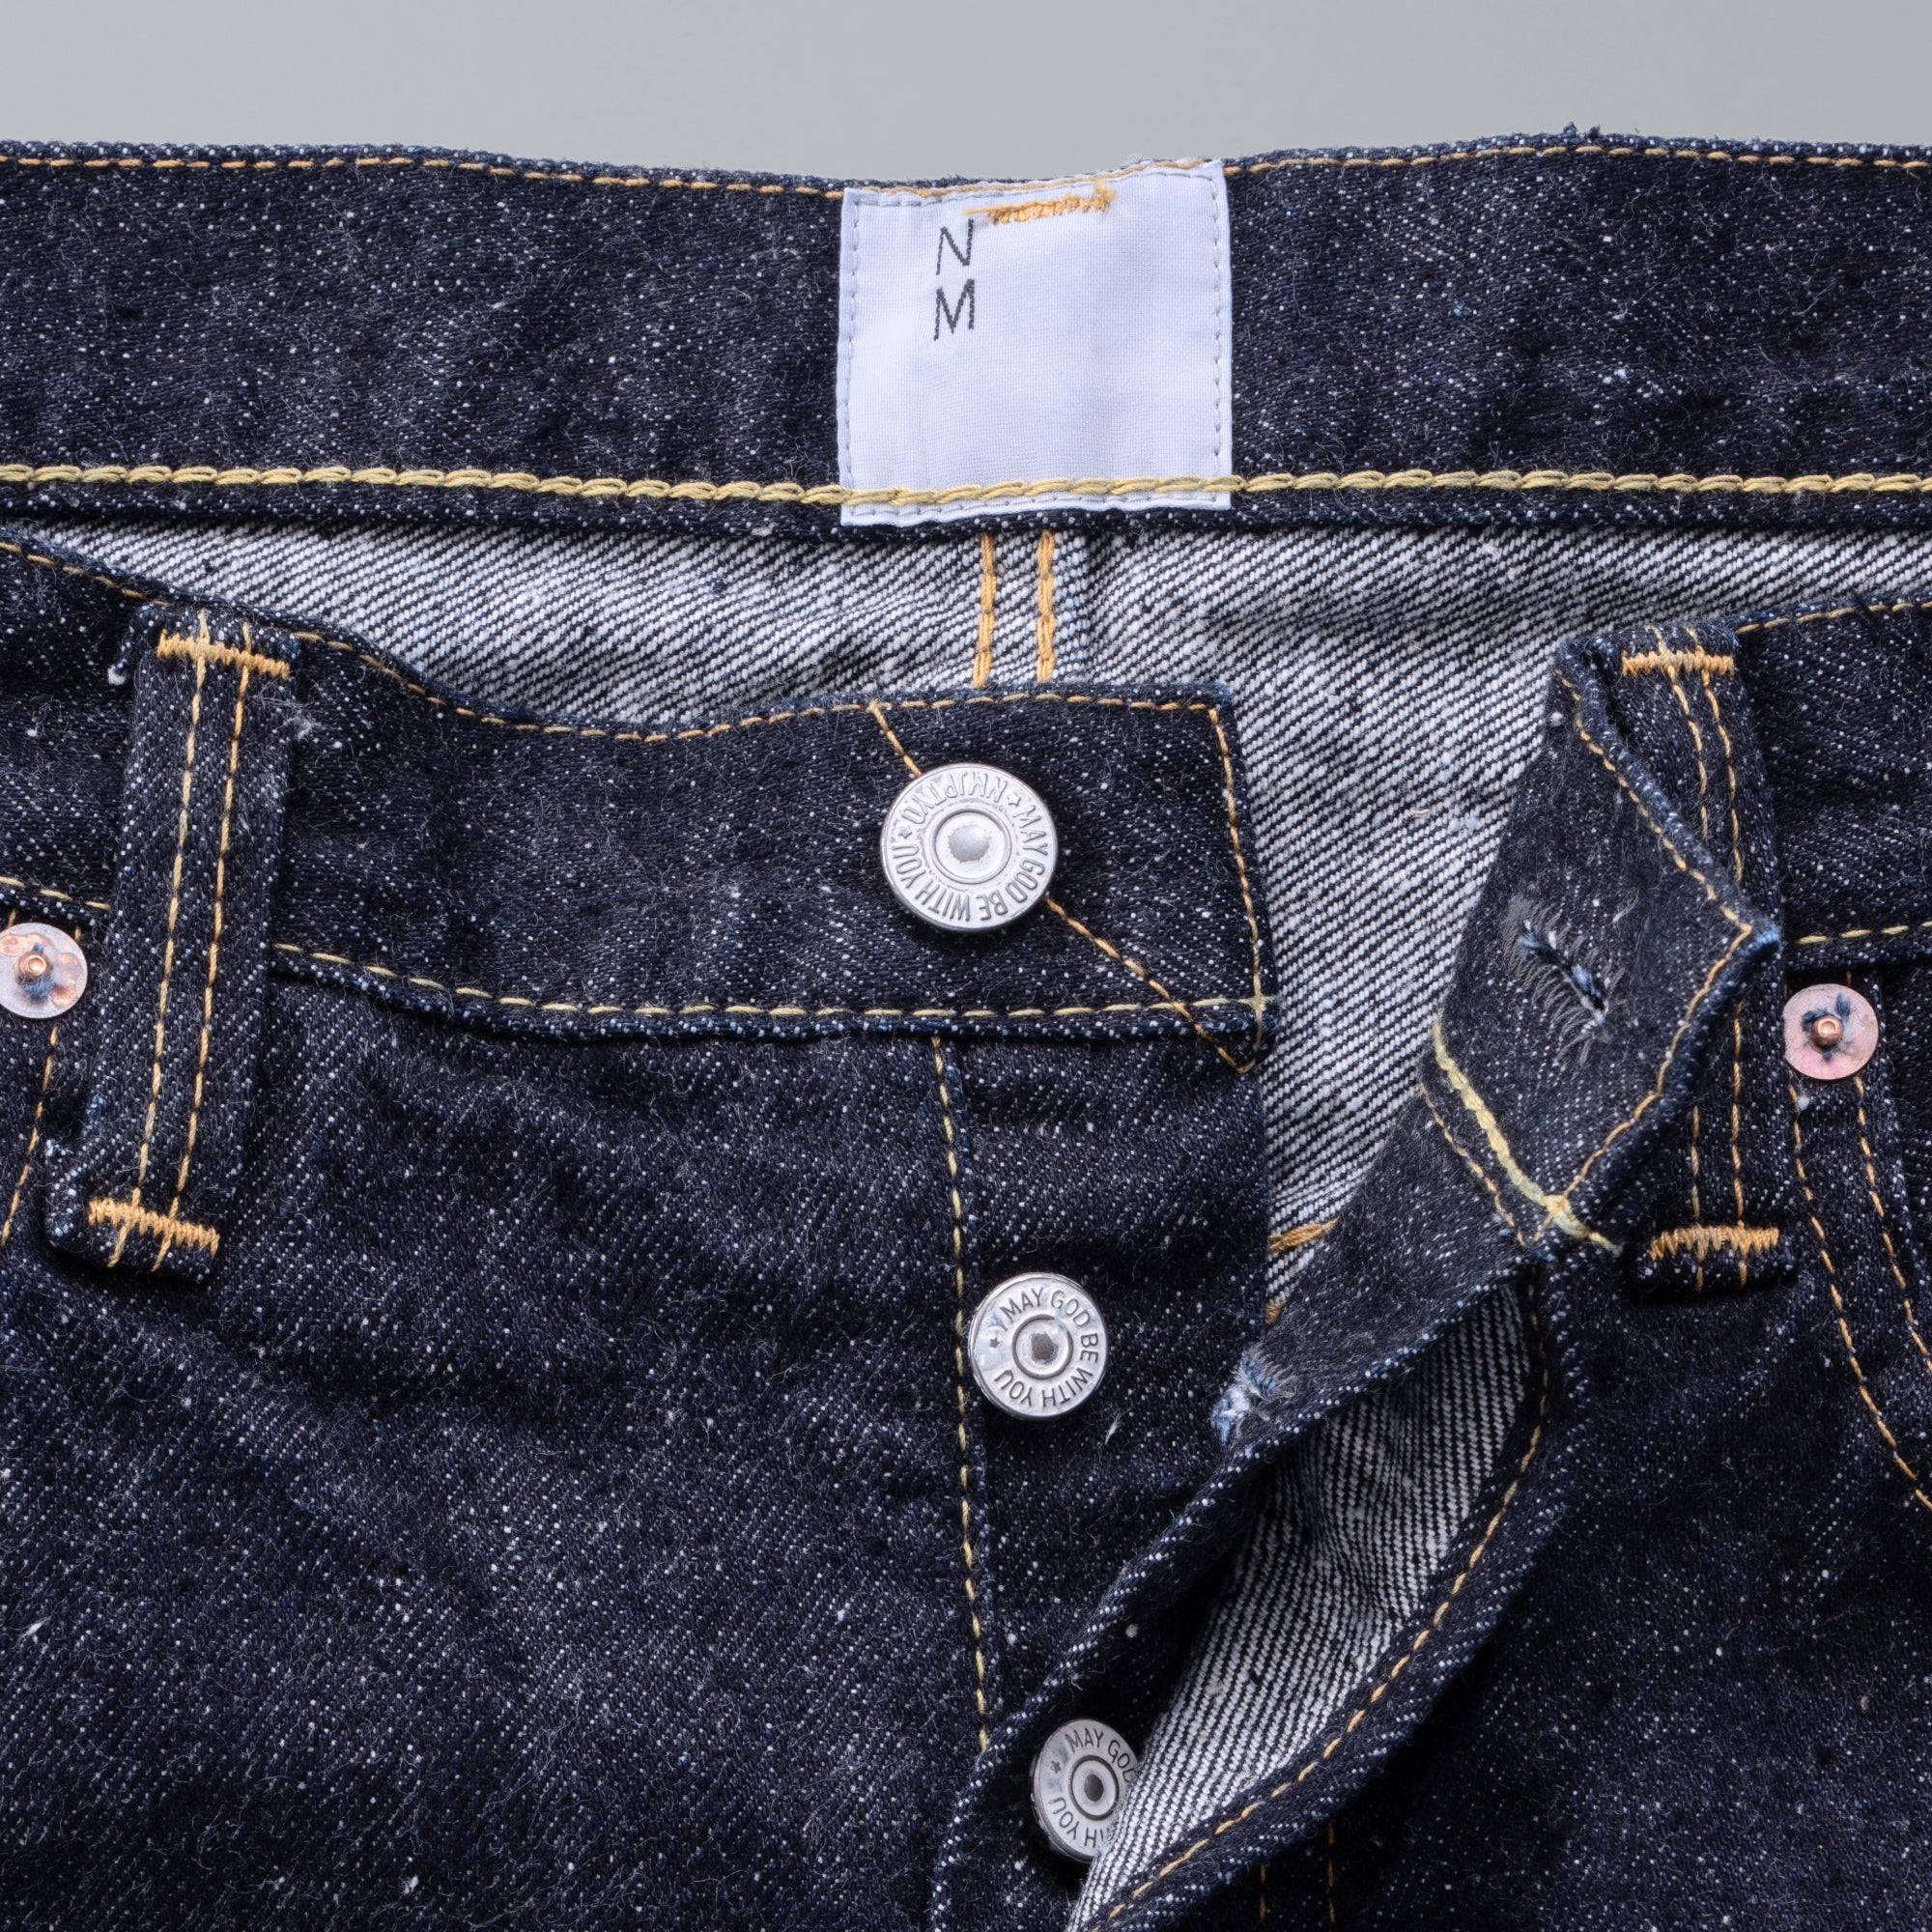 New Manuel #017 LV61'sTAPERED ONE-WASHED